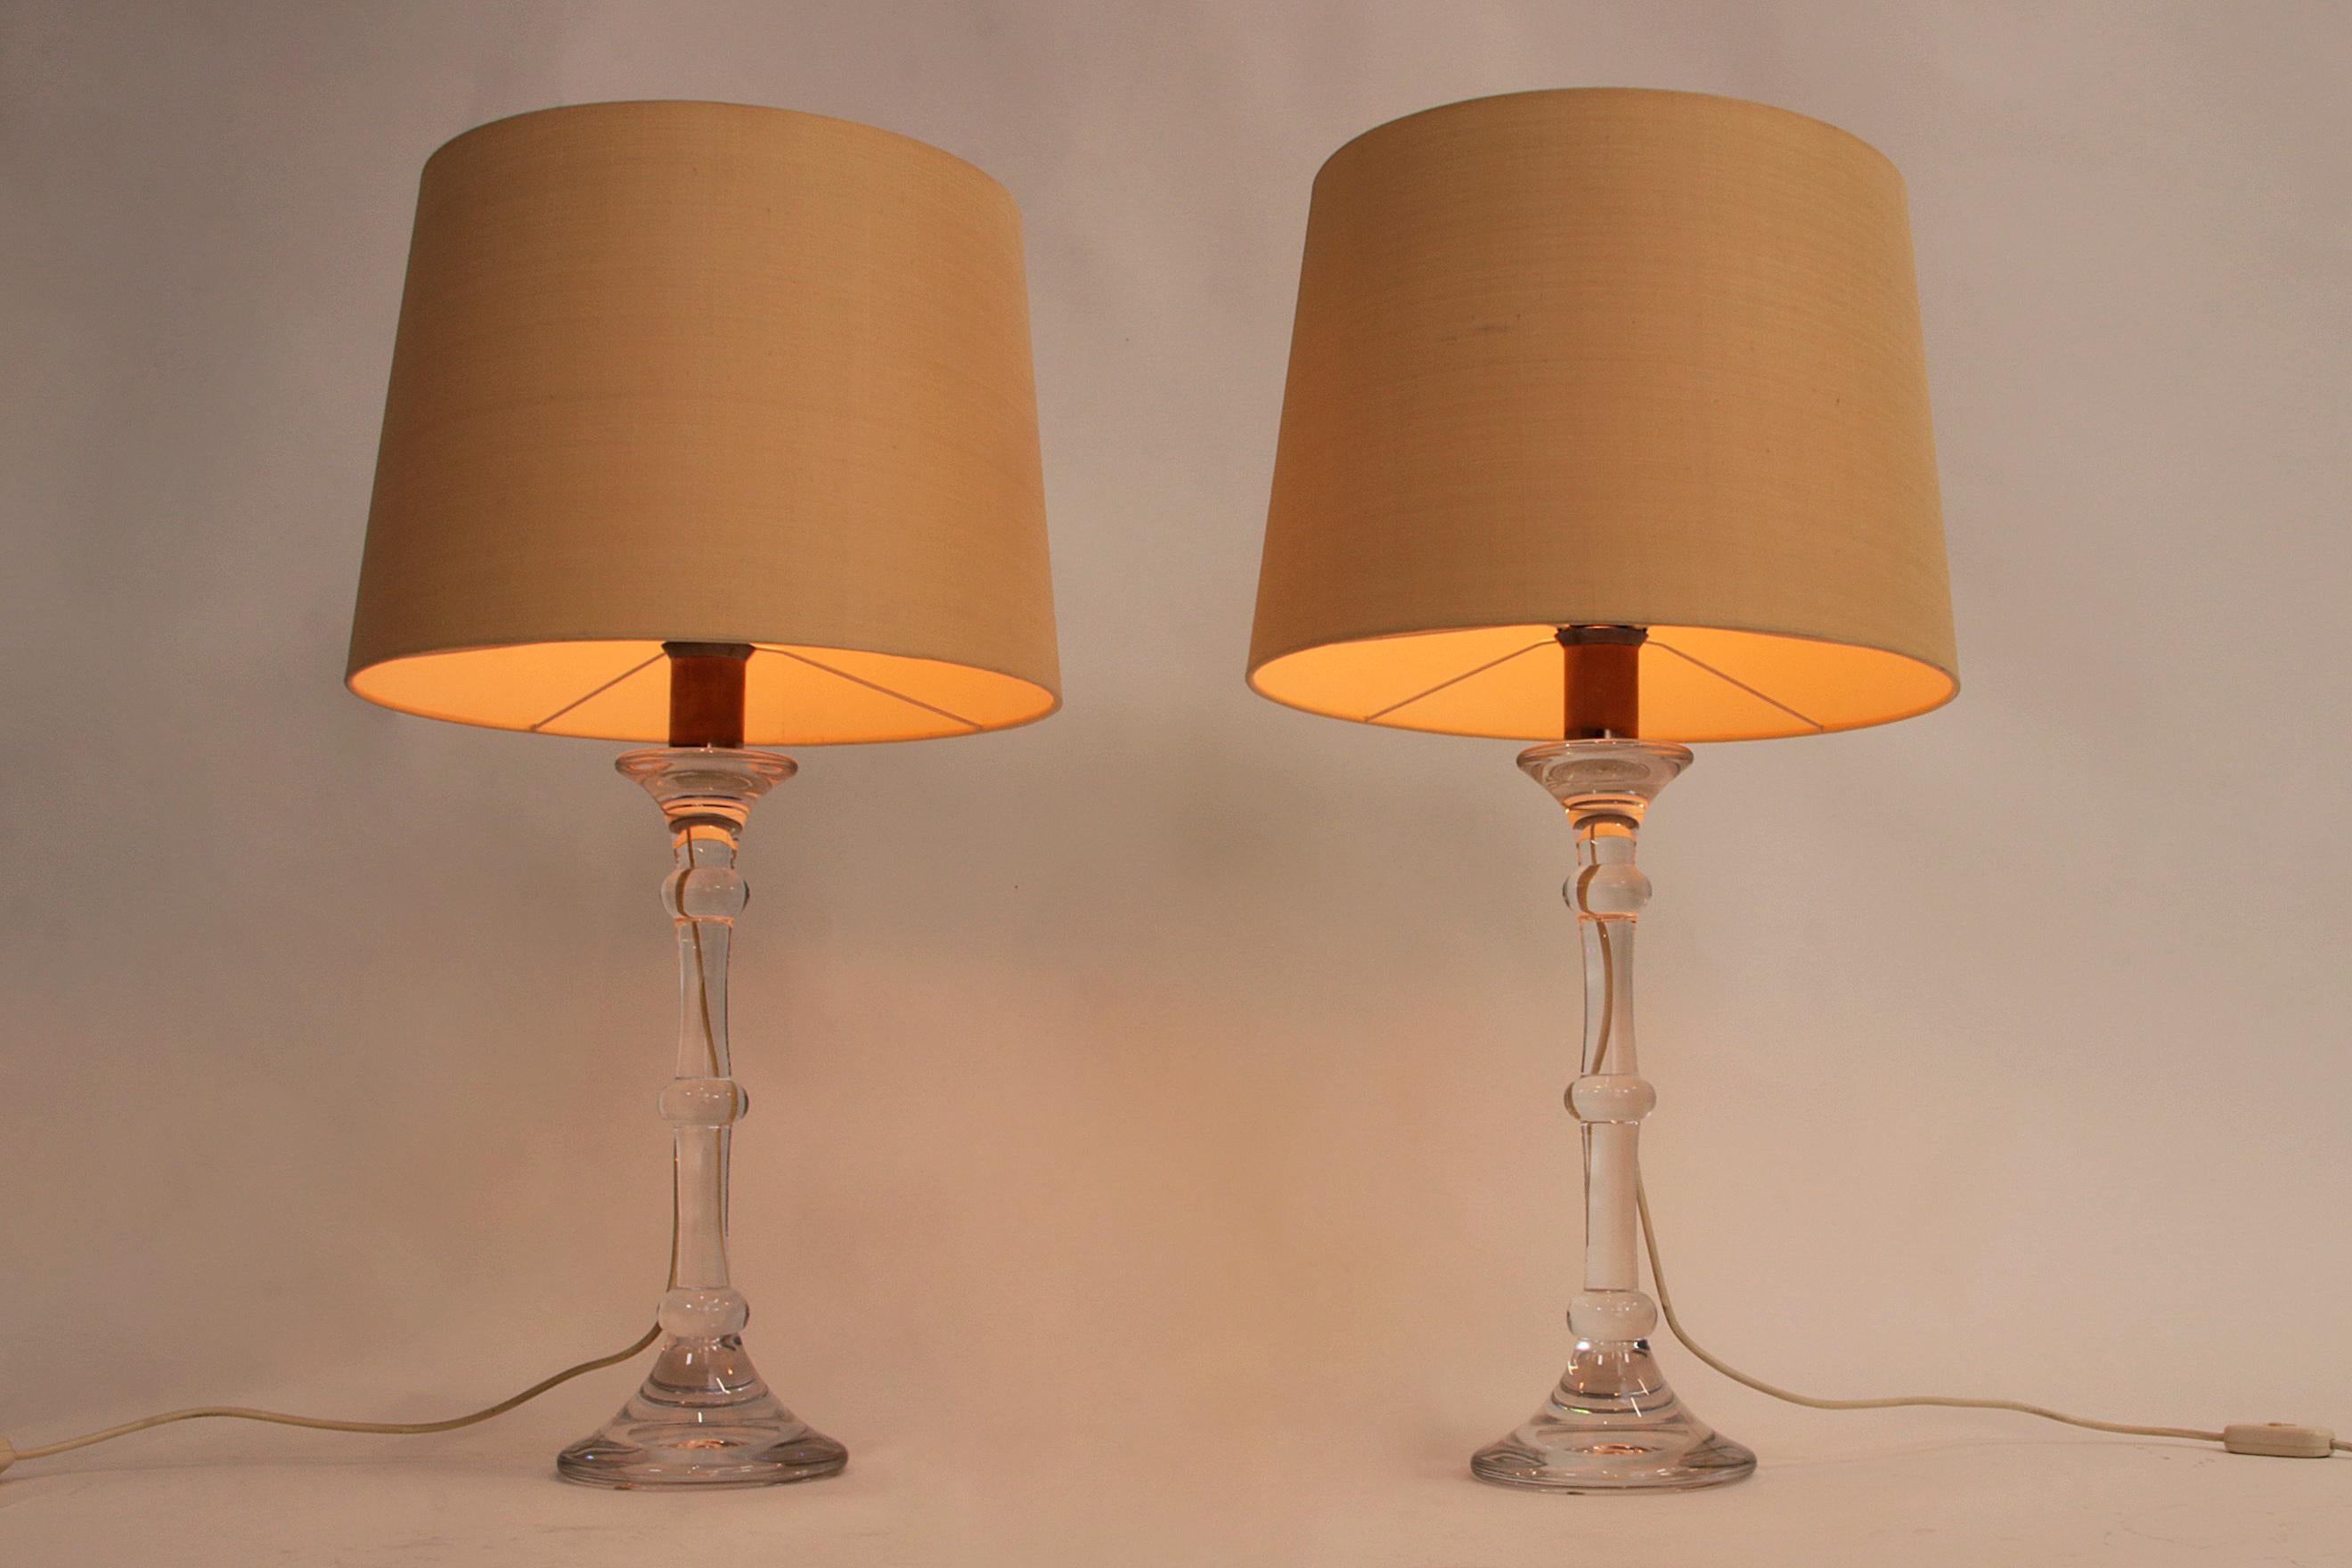 German Ingo Maurer, Glass Table lampst with cream lampshades 1960 Mouth-blown For Sale